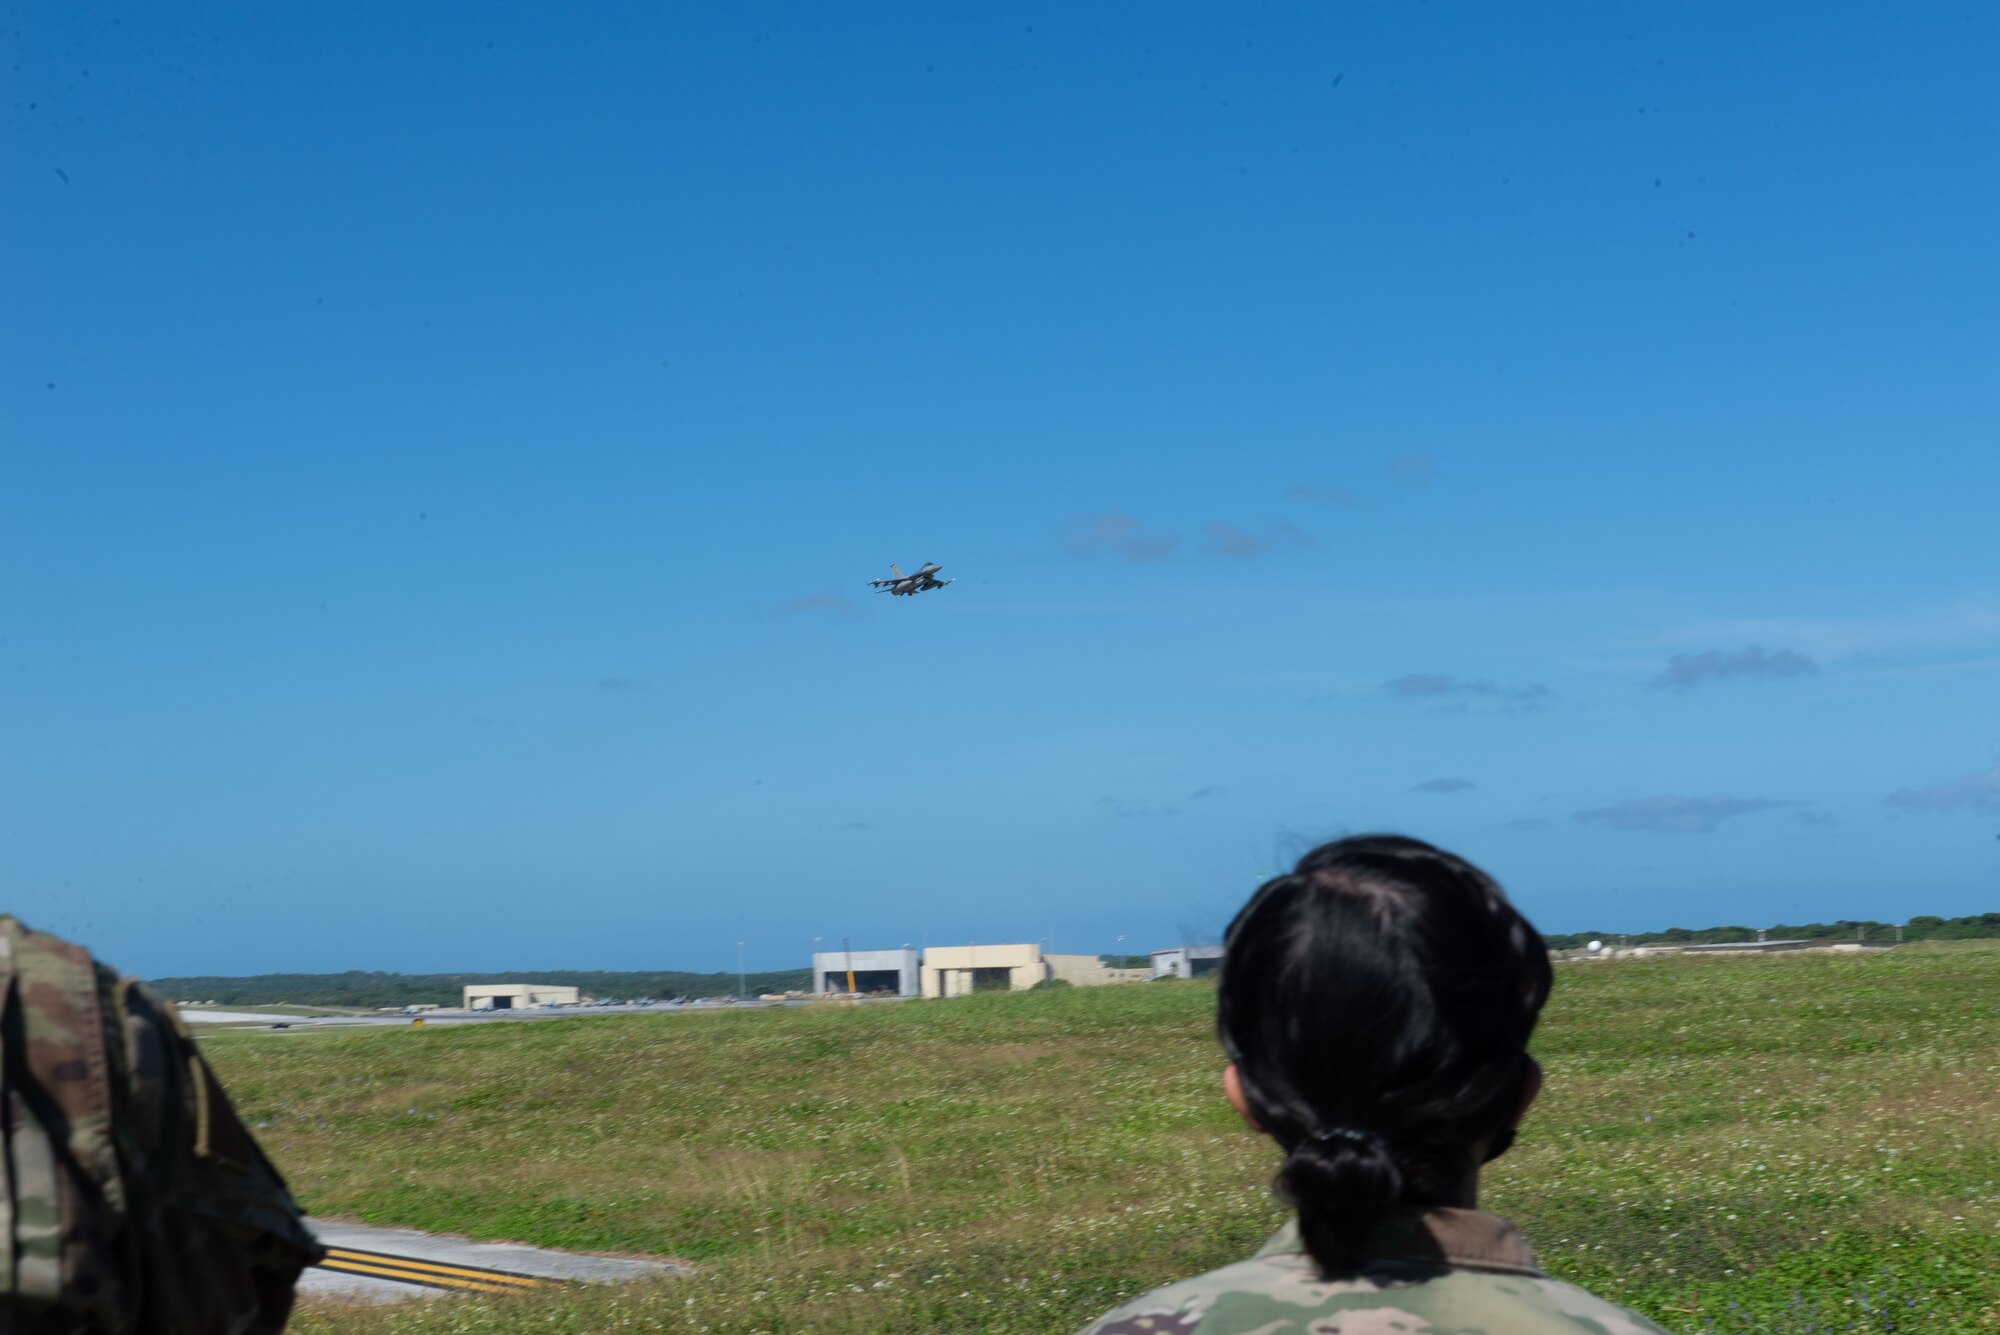 Airmen assigned to the 36th Contingency Response Group watch as a U.S. Air Force F-16 Fighting Falcon, assigned to the 18th Aggressor Squadron, Eielson Air Force Base, Alaska, takes off during a group flight line engagement for Exercise Cope North 2021 at Andersen Air Force Base, Guam, Feb. 10, 2021.